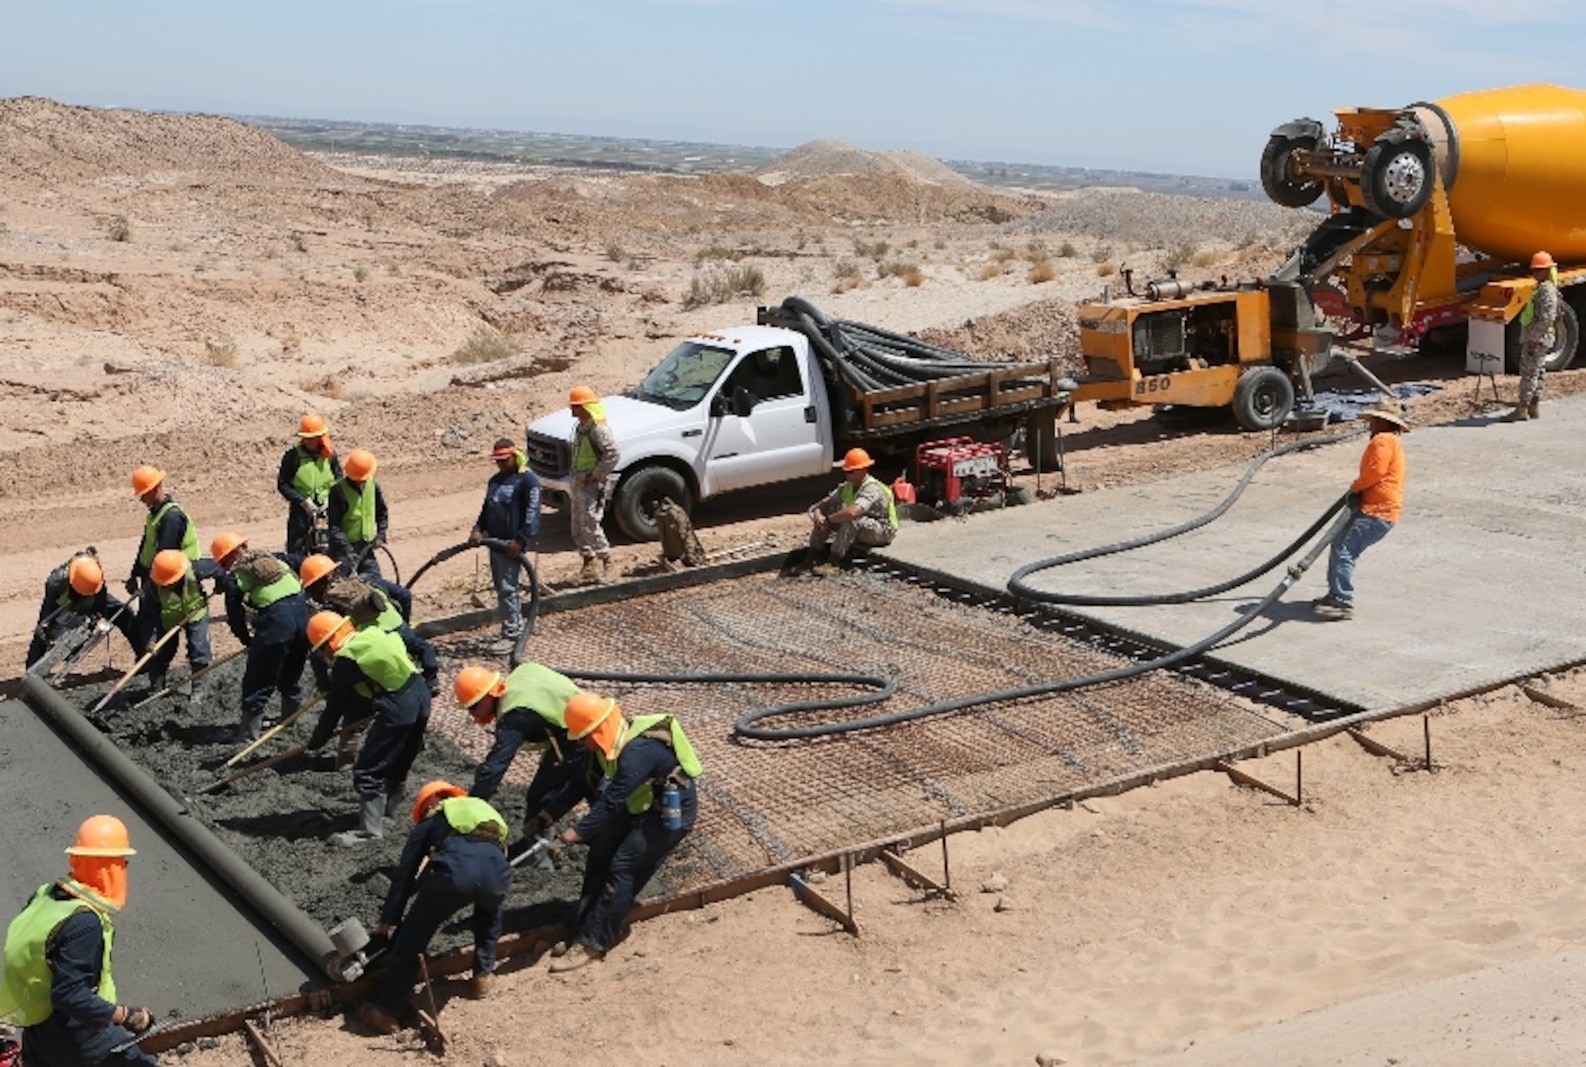 U.S. Marines with 7th Engineer Support Battalion assist in pouring out concrete during a road improvement project with Joint Task Force North in El Centro, Calif., April 19, 2016. For the last two months, the Marines have been processing and leveling dirt to improve the road’s quality as well as constructing low-water crossings to maintain the integrity of the road during wet conditions. (U.S. Marine Corps photo by Cpl. Carson Gramley/released)